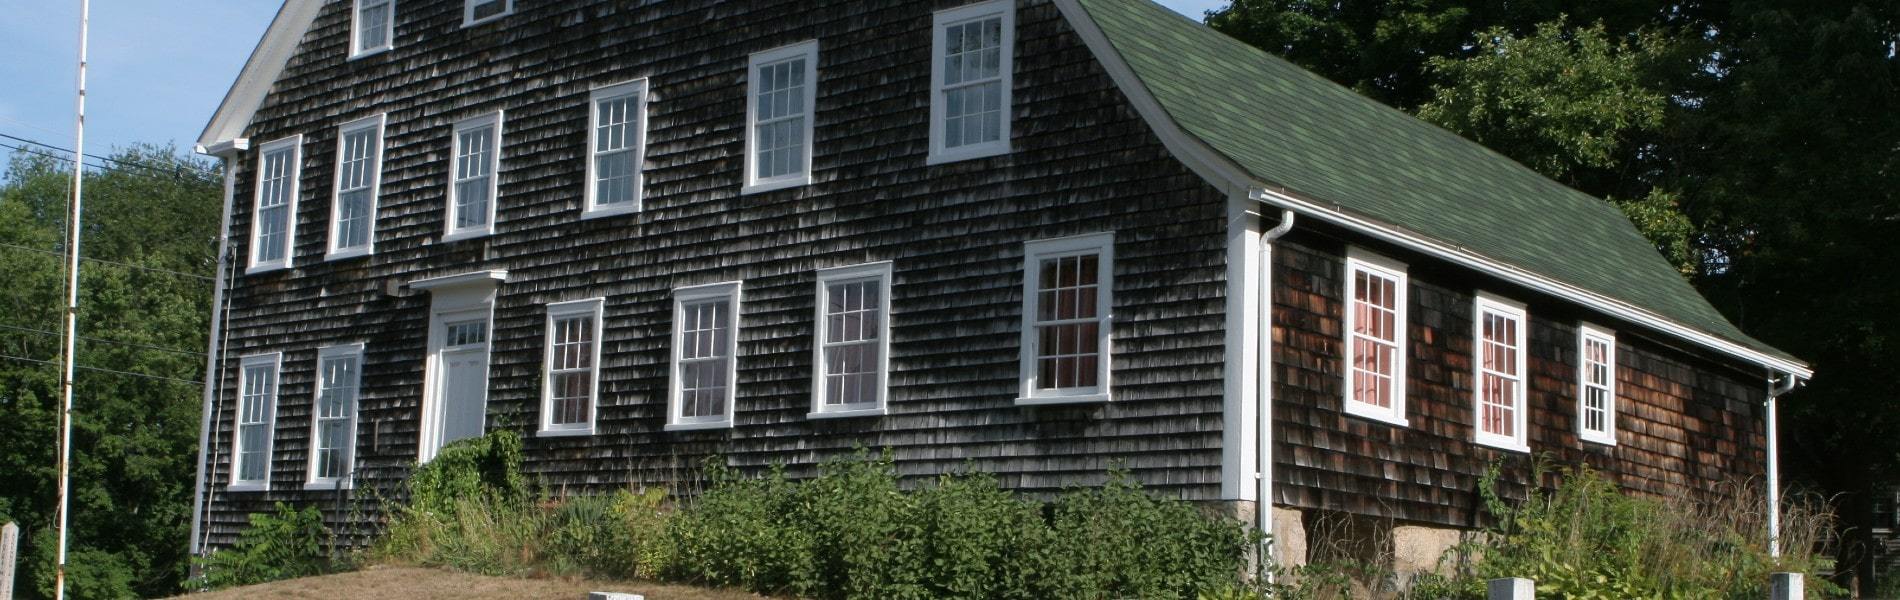 Colonial Homes in Rhode Island